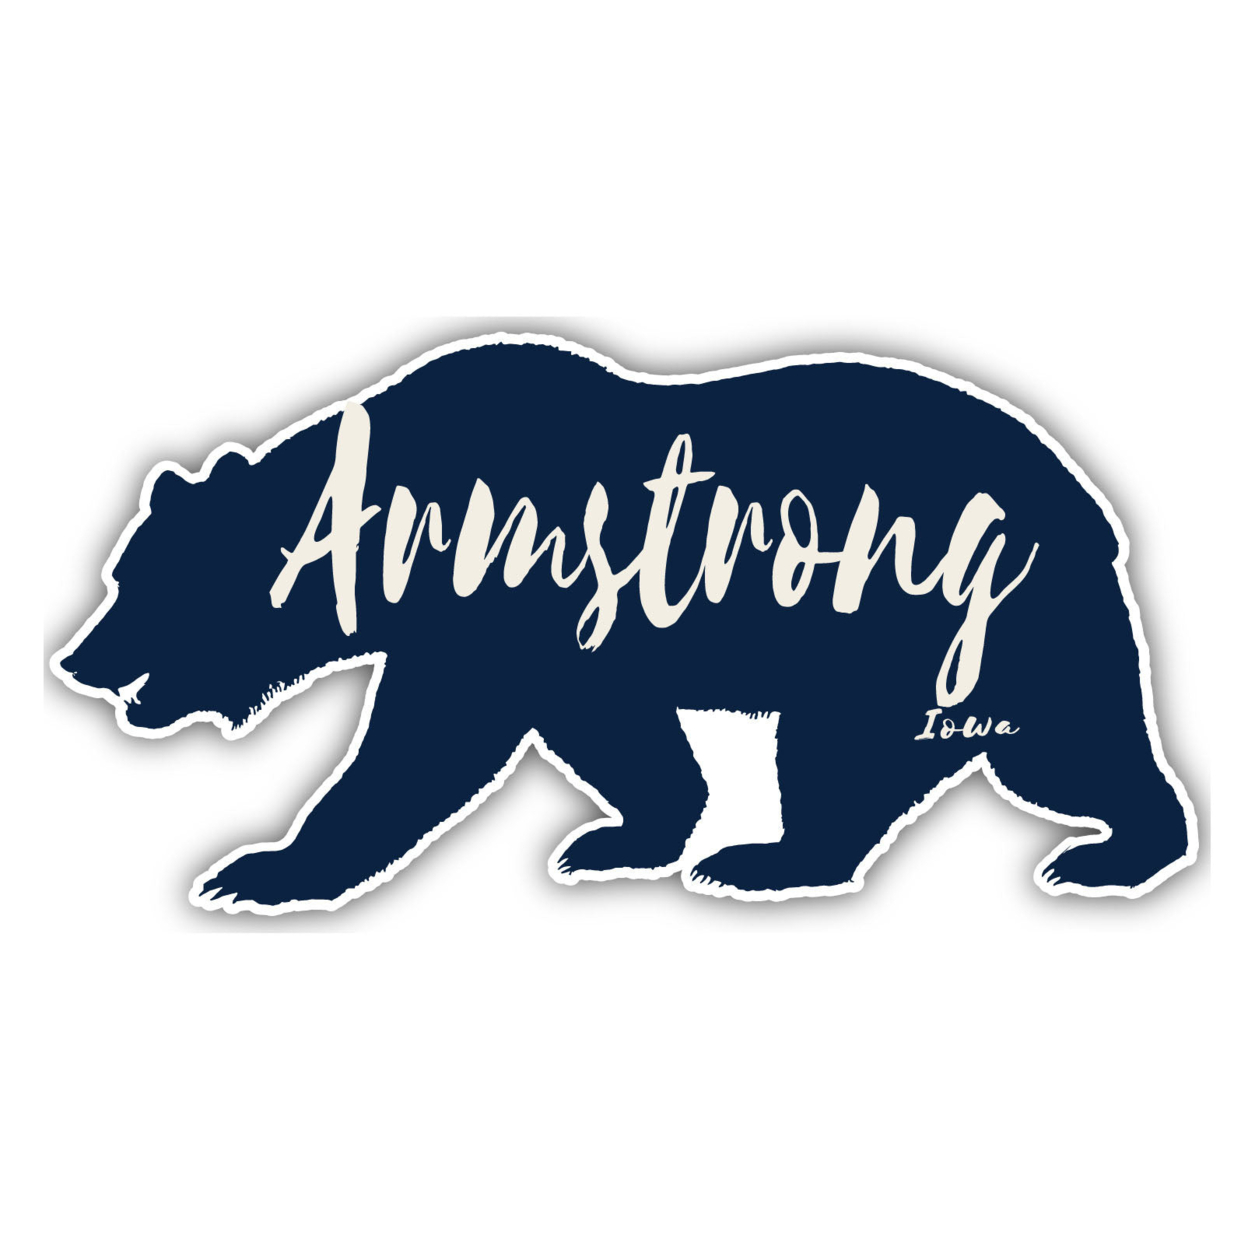 Armstrong Iowa Souvenir Decorative Stickers (Choose Theme And Size) - 4-Pack, 8-Inch, Bear